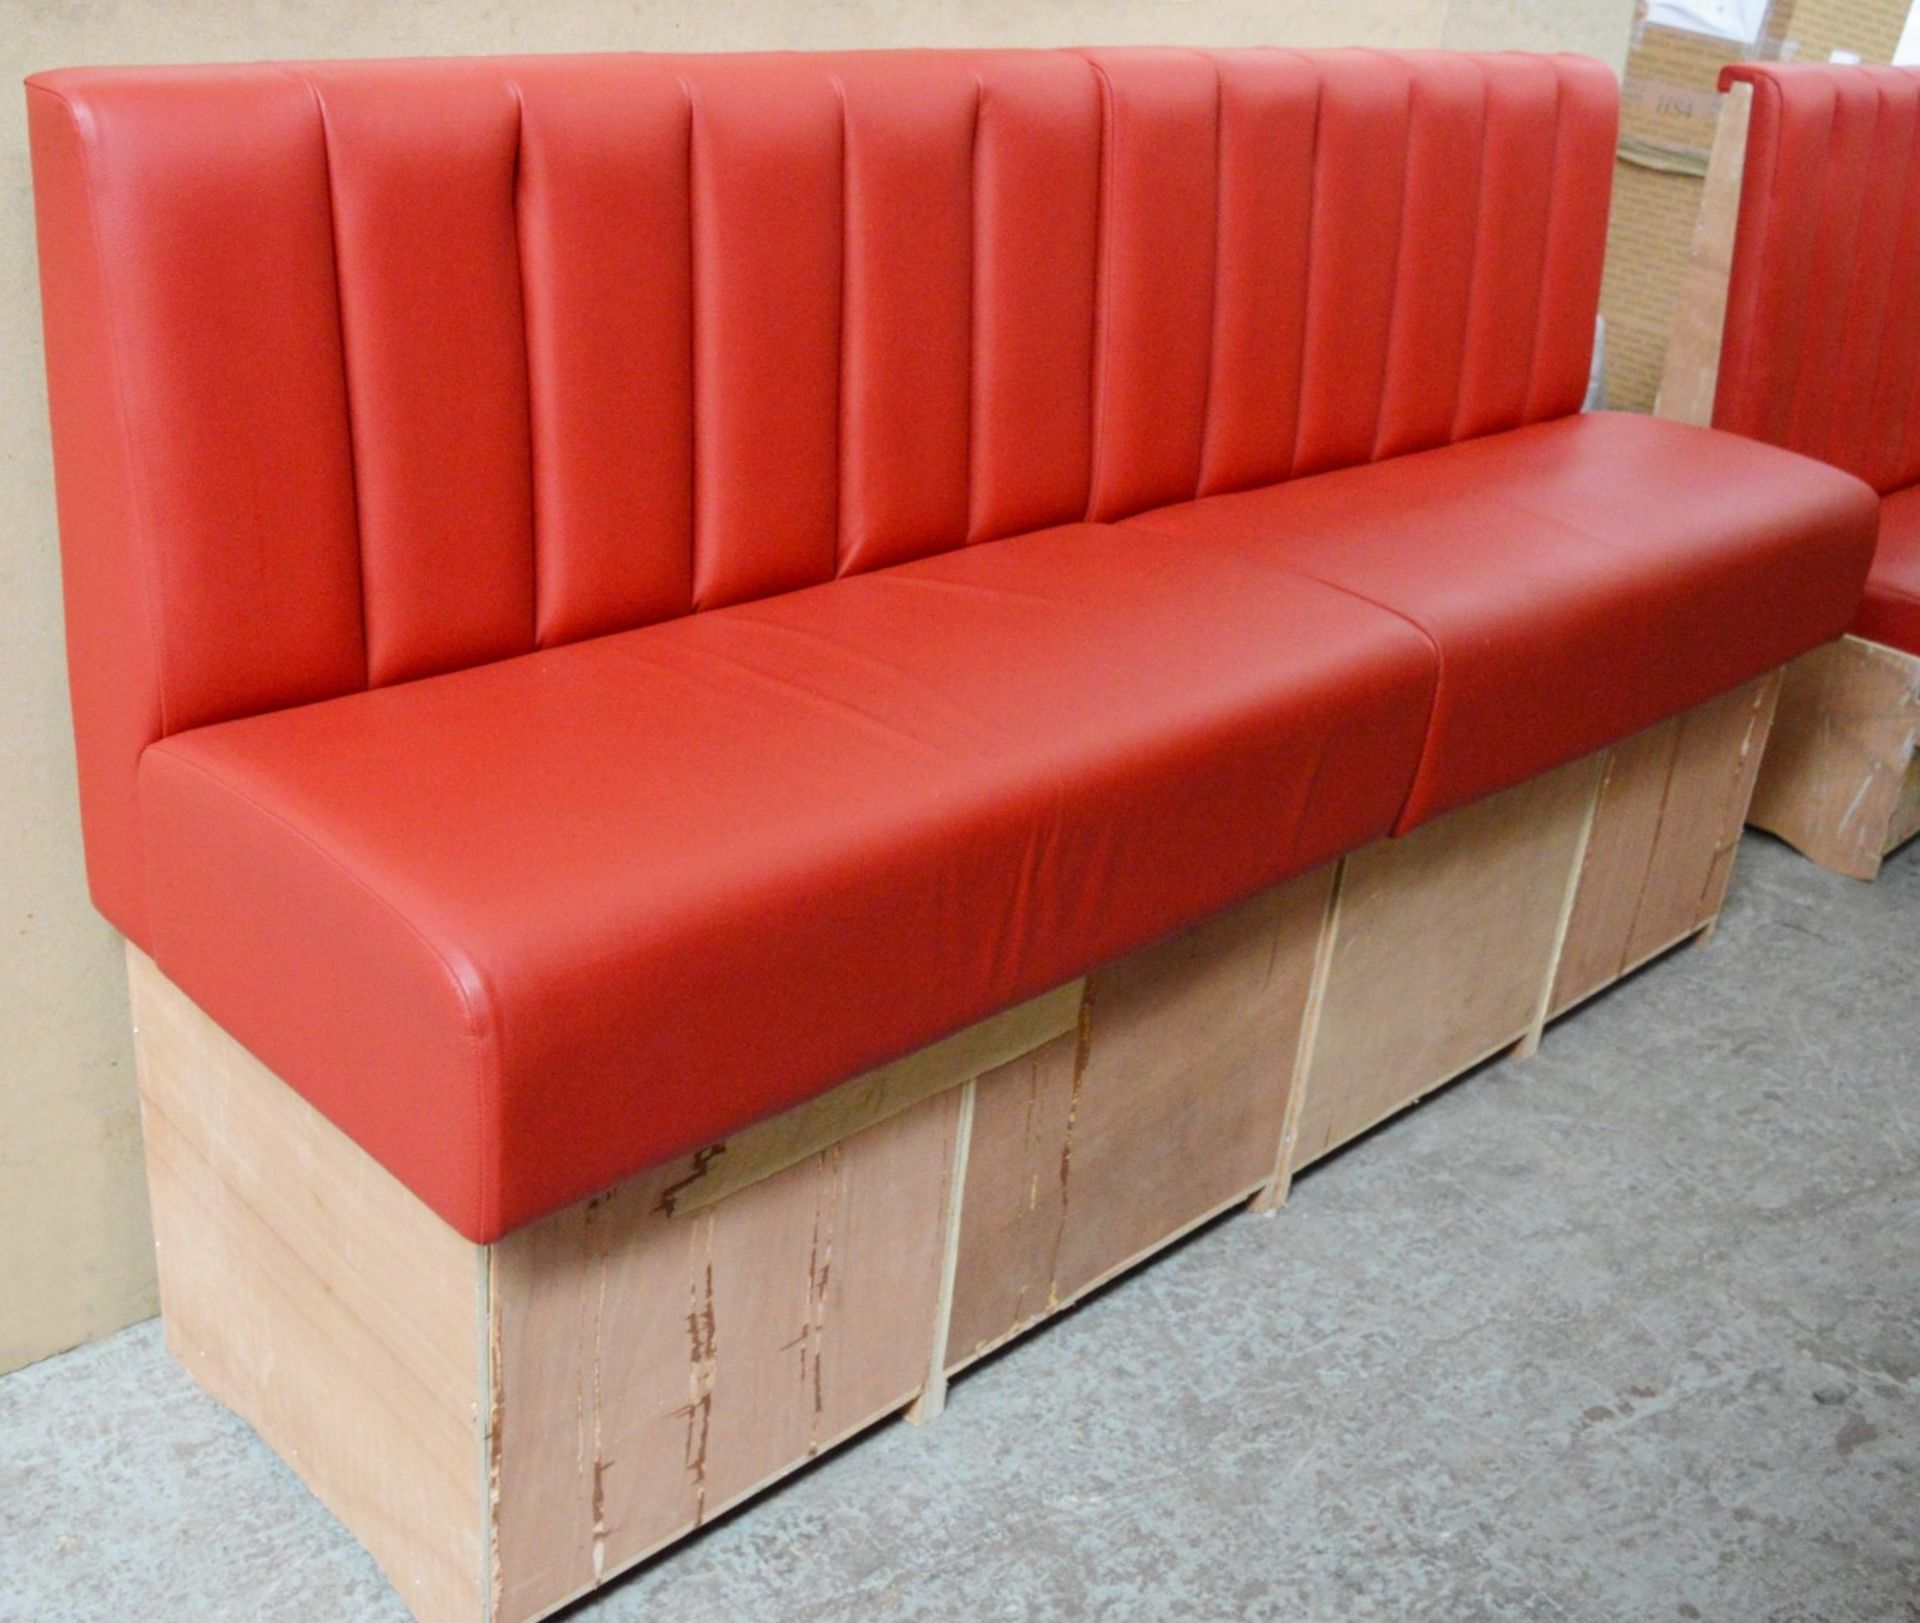 1 x High Seat Double Seating Bench Upholstered in Red Leather - Sits upto Four People - High Quality - Image 8 of 26